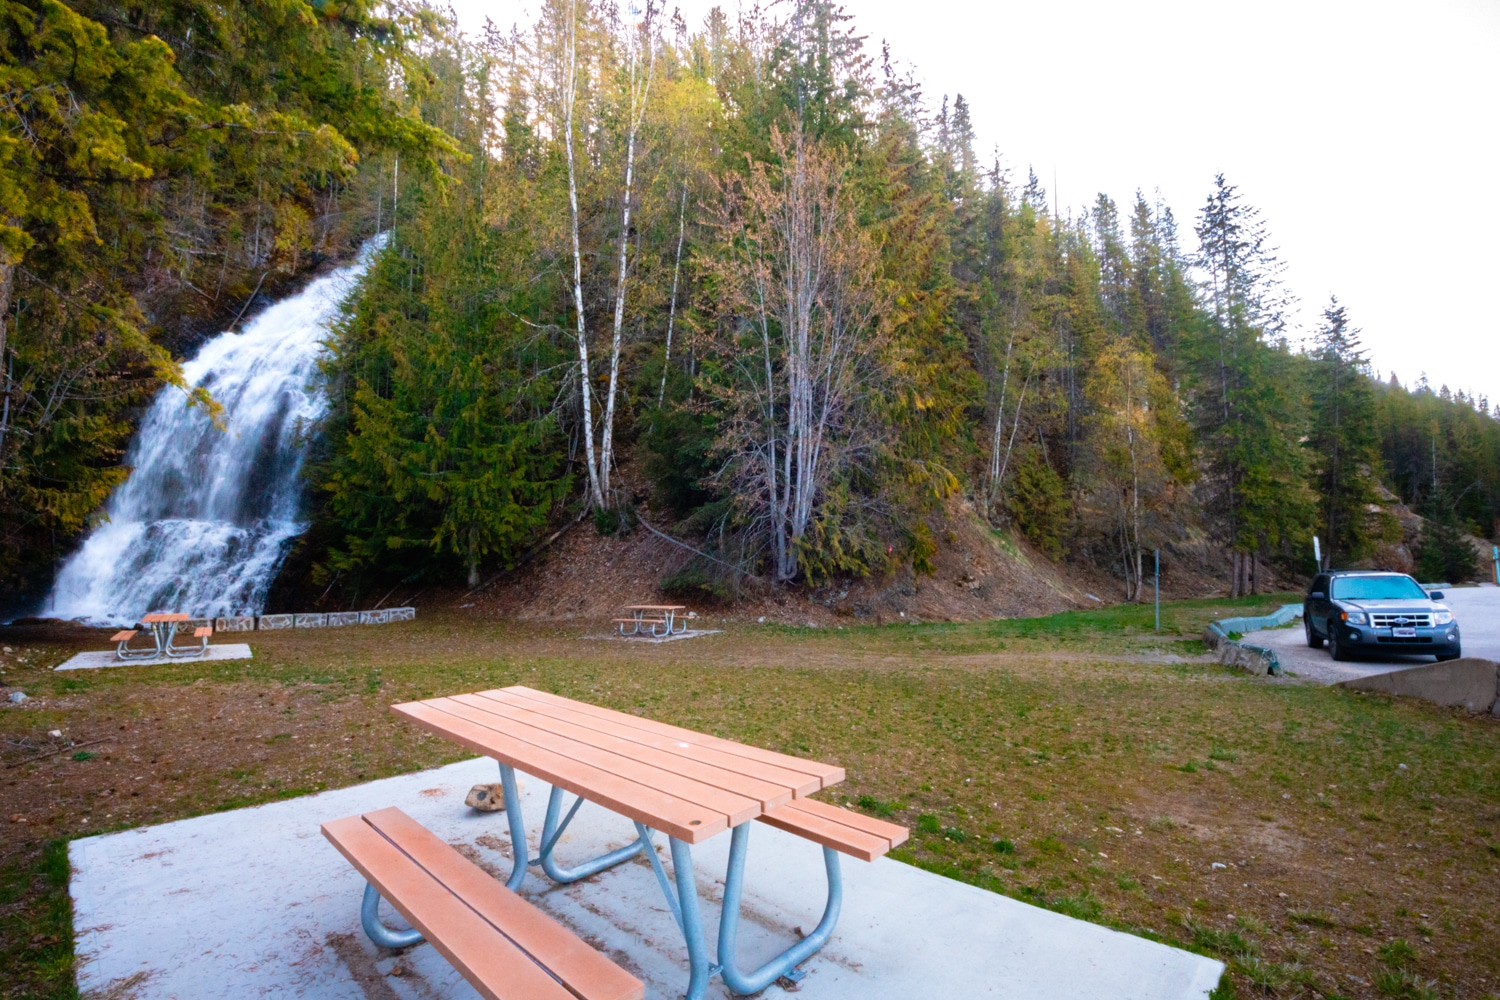 View of the picnic area, parking area, and waterfall at the Ione Rest Area near Nakusp, BC.